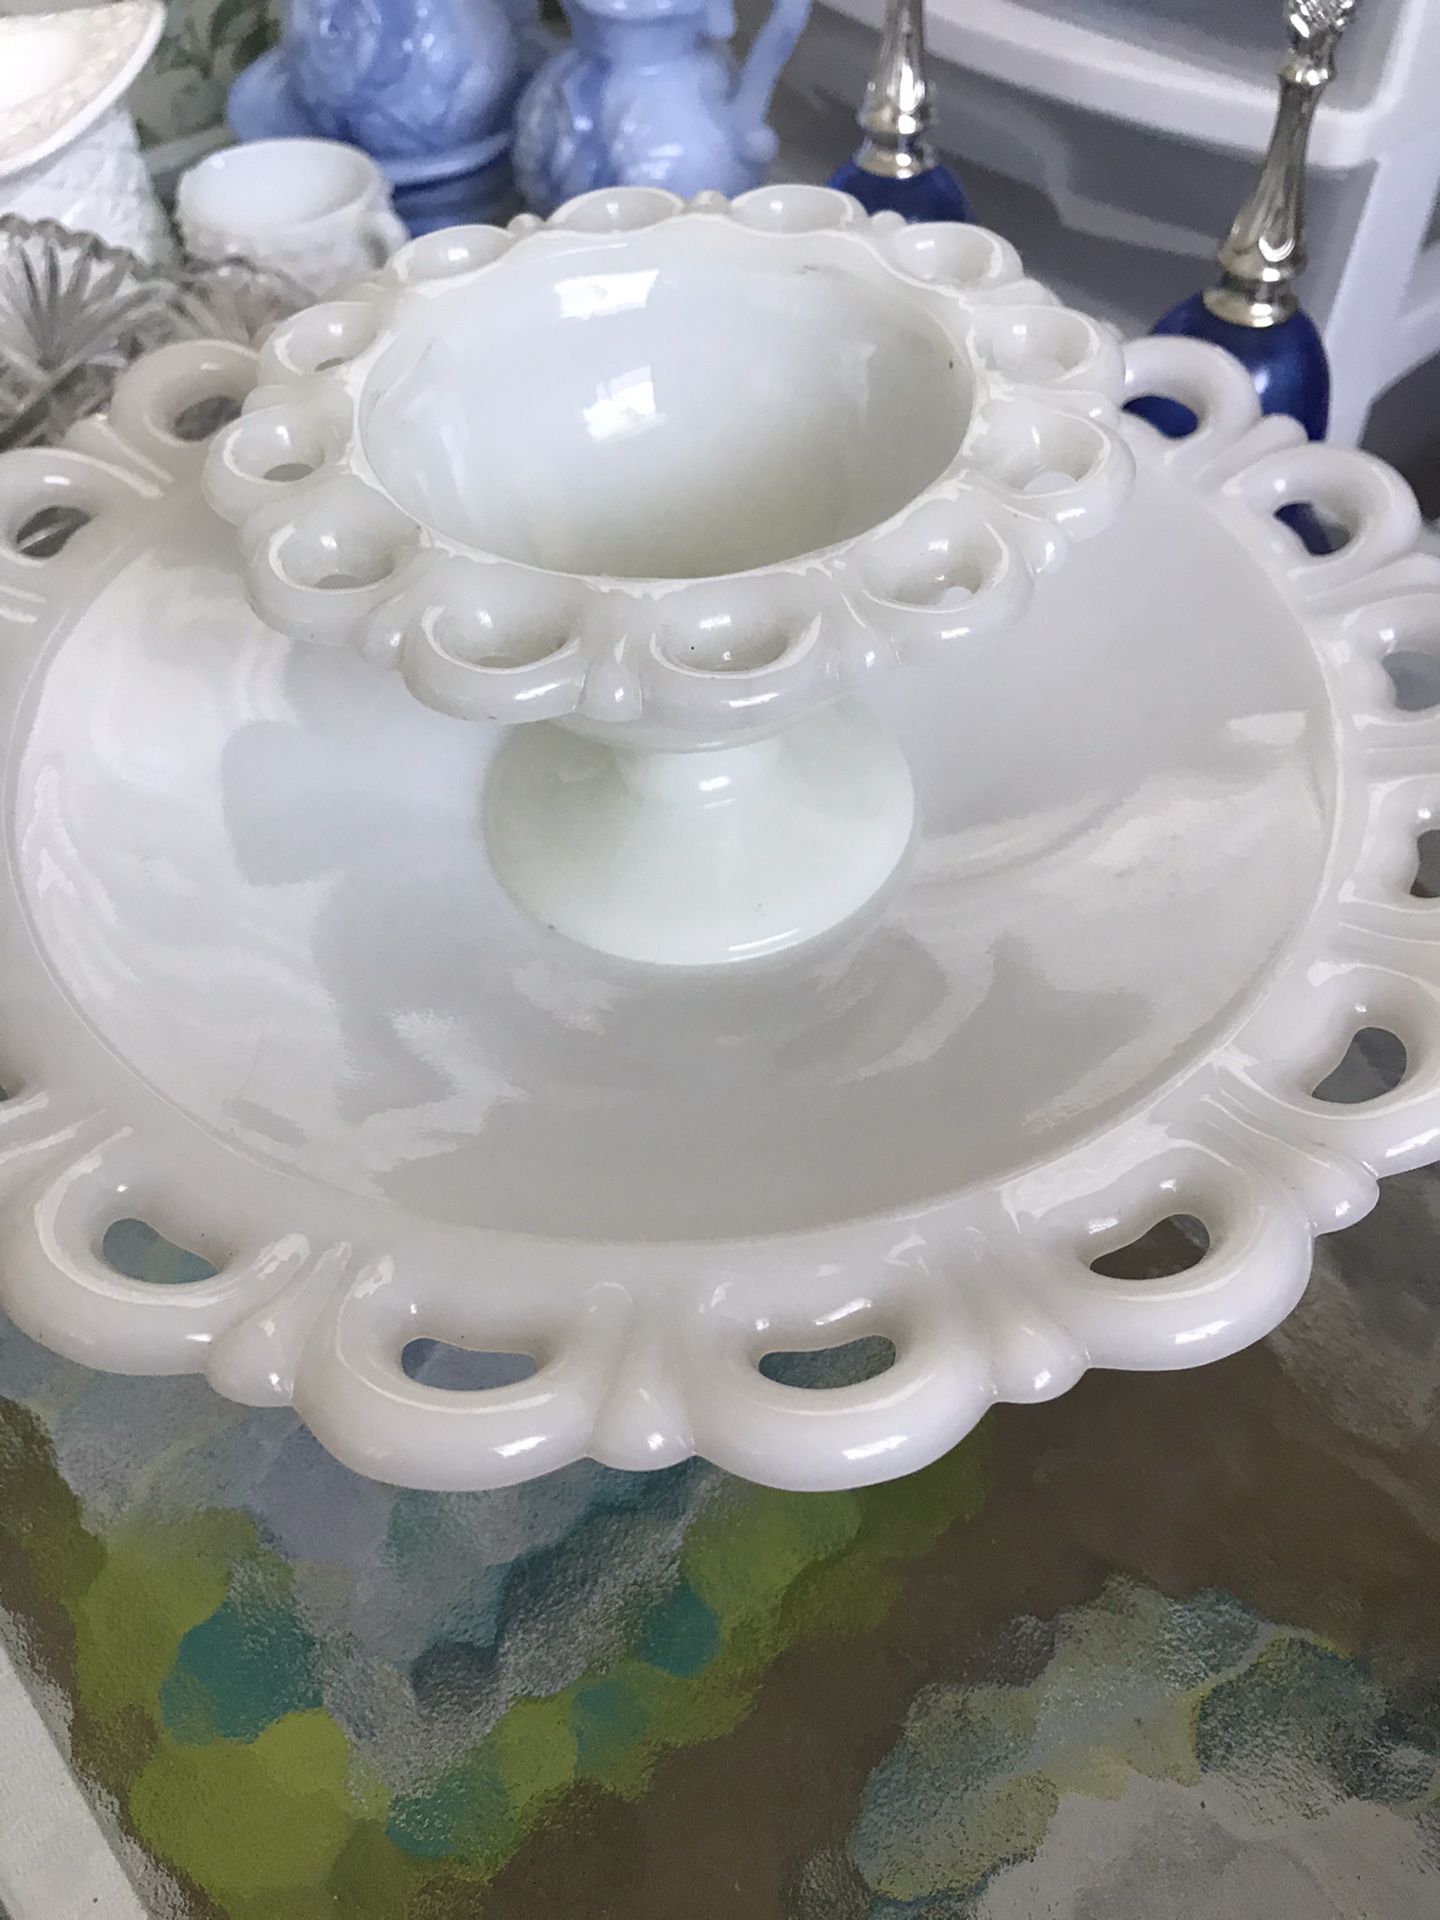 SALE PENDING-MOVING, 2-A/H Old Colony Open Lace milk glass pieces. $20.00, Pickup